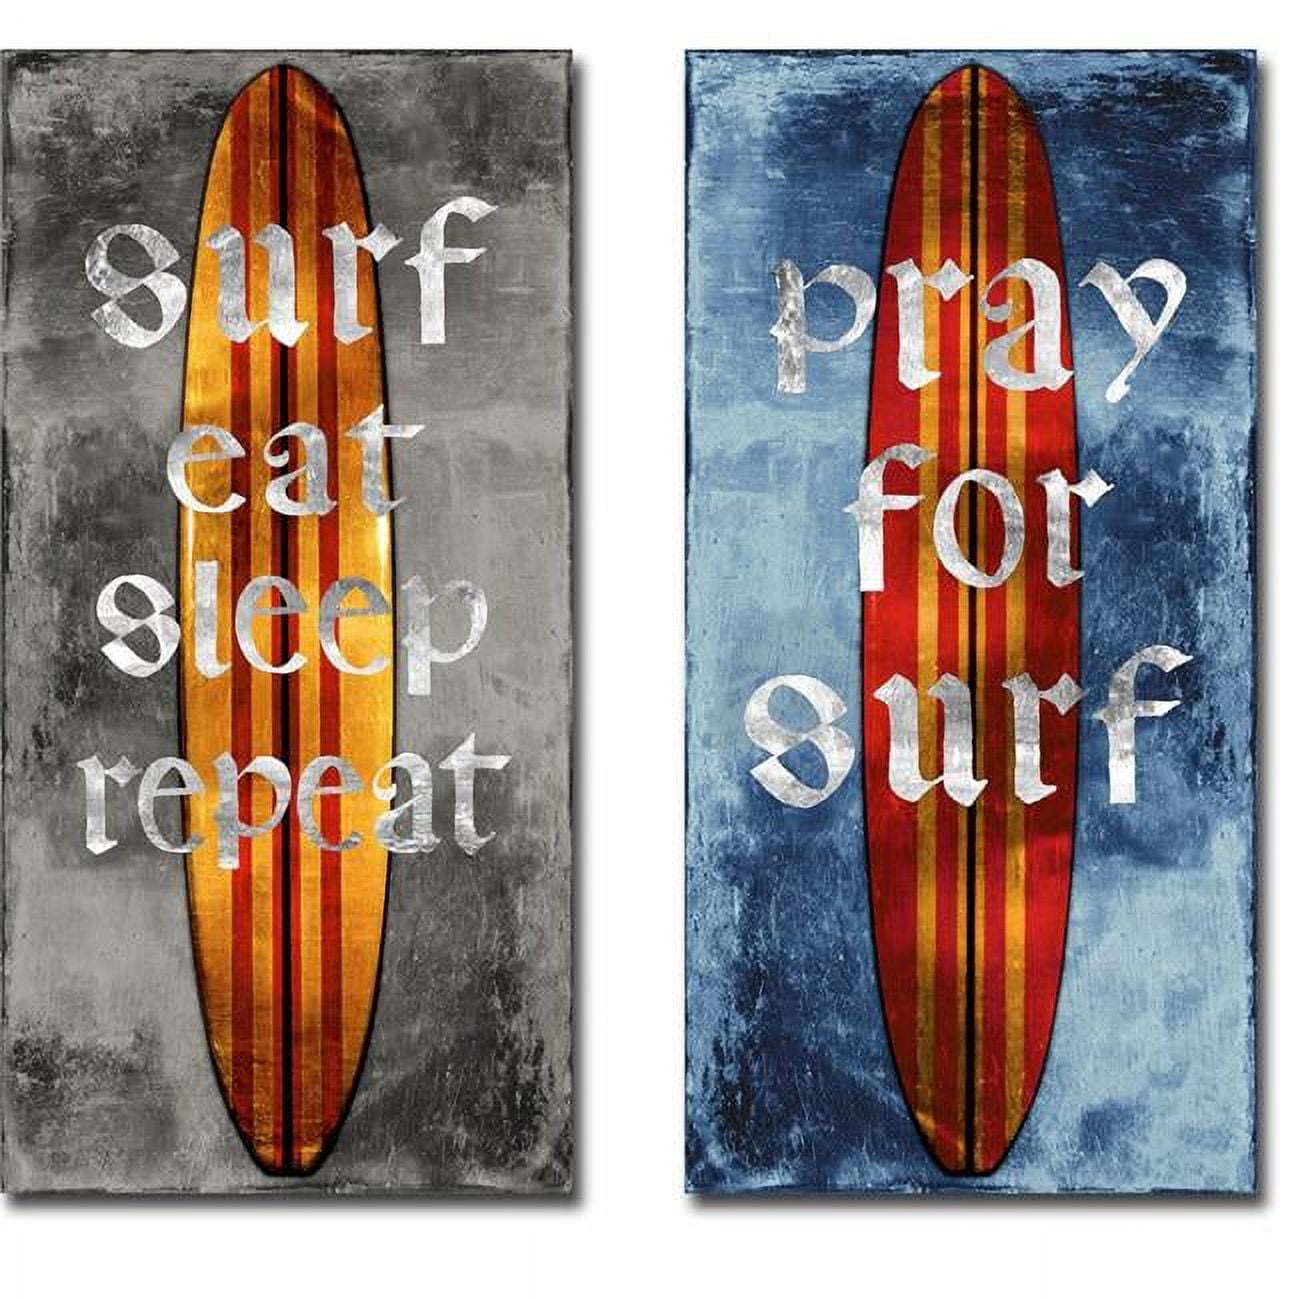 1224677tg Surf Repeat & Pray For Surf, Surfboard By Charlie Carter Premium Gallery-wrapped Canvas Giclee Art Set - Ready To Hang, 24 X 12 In.